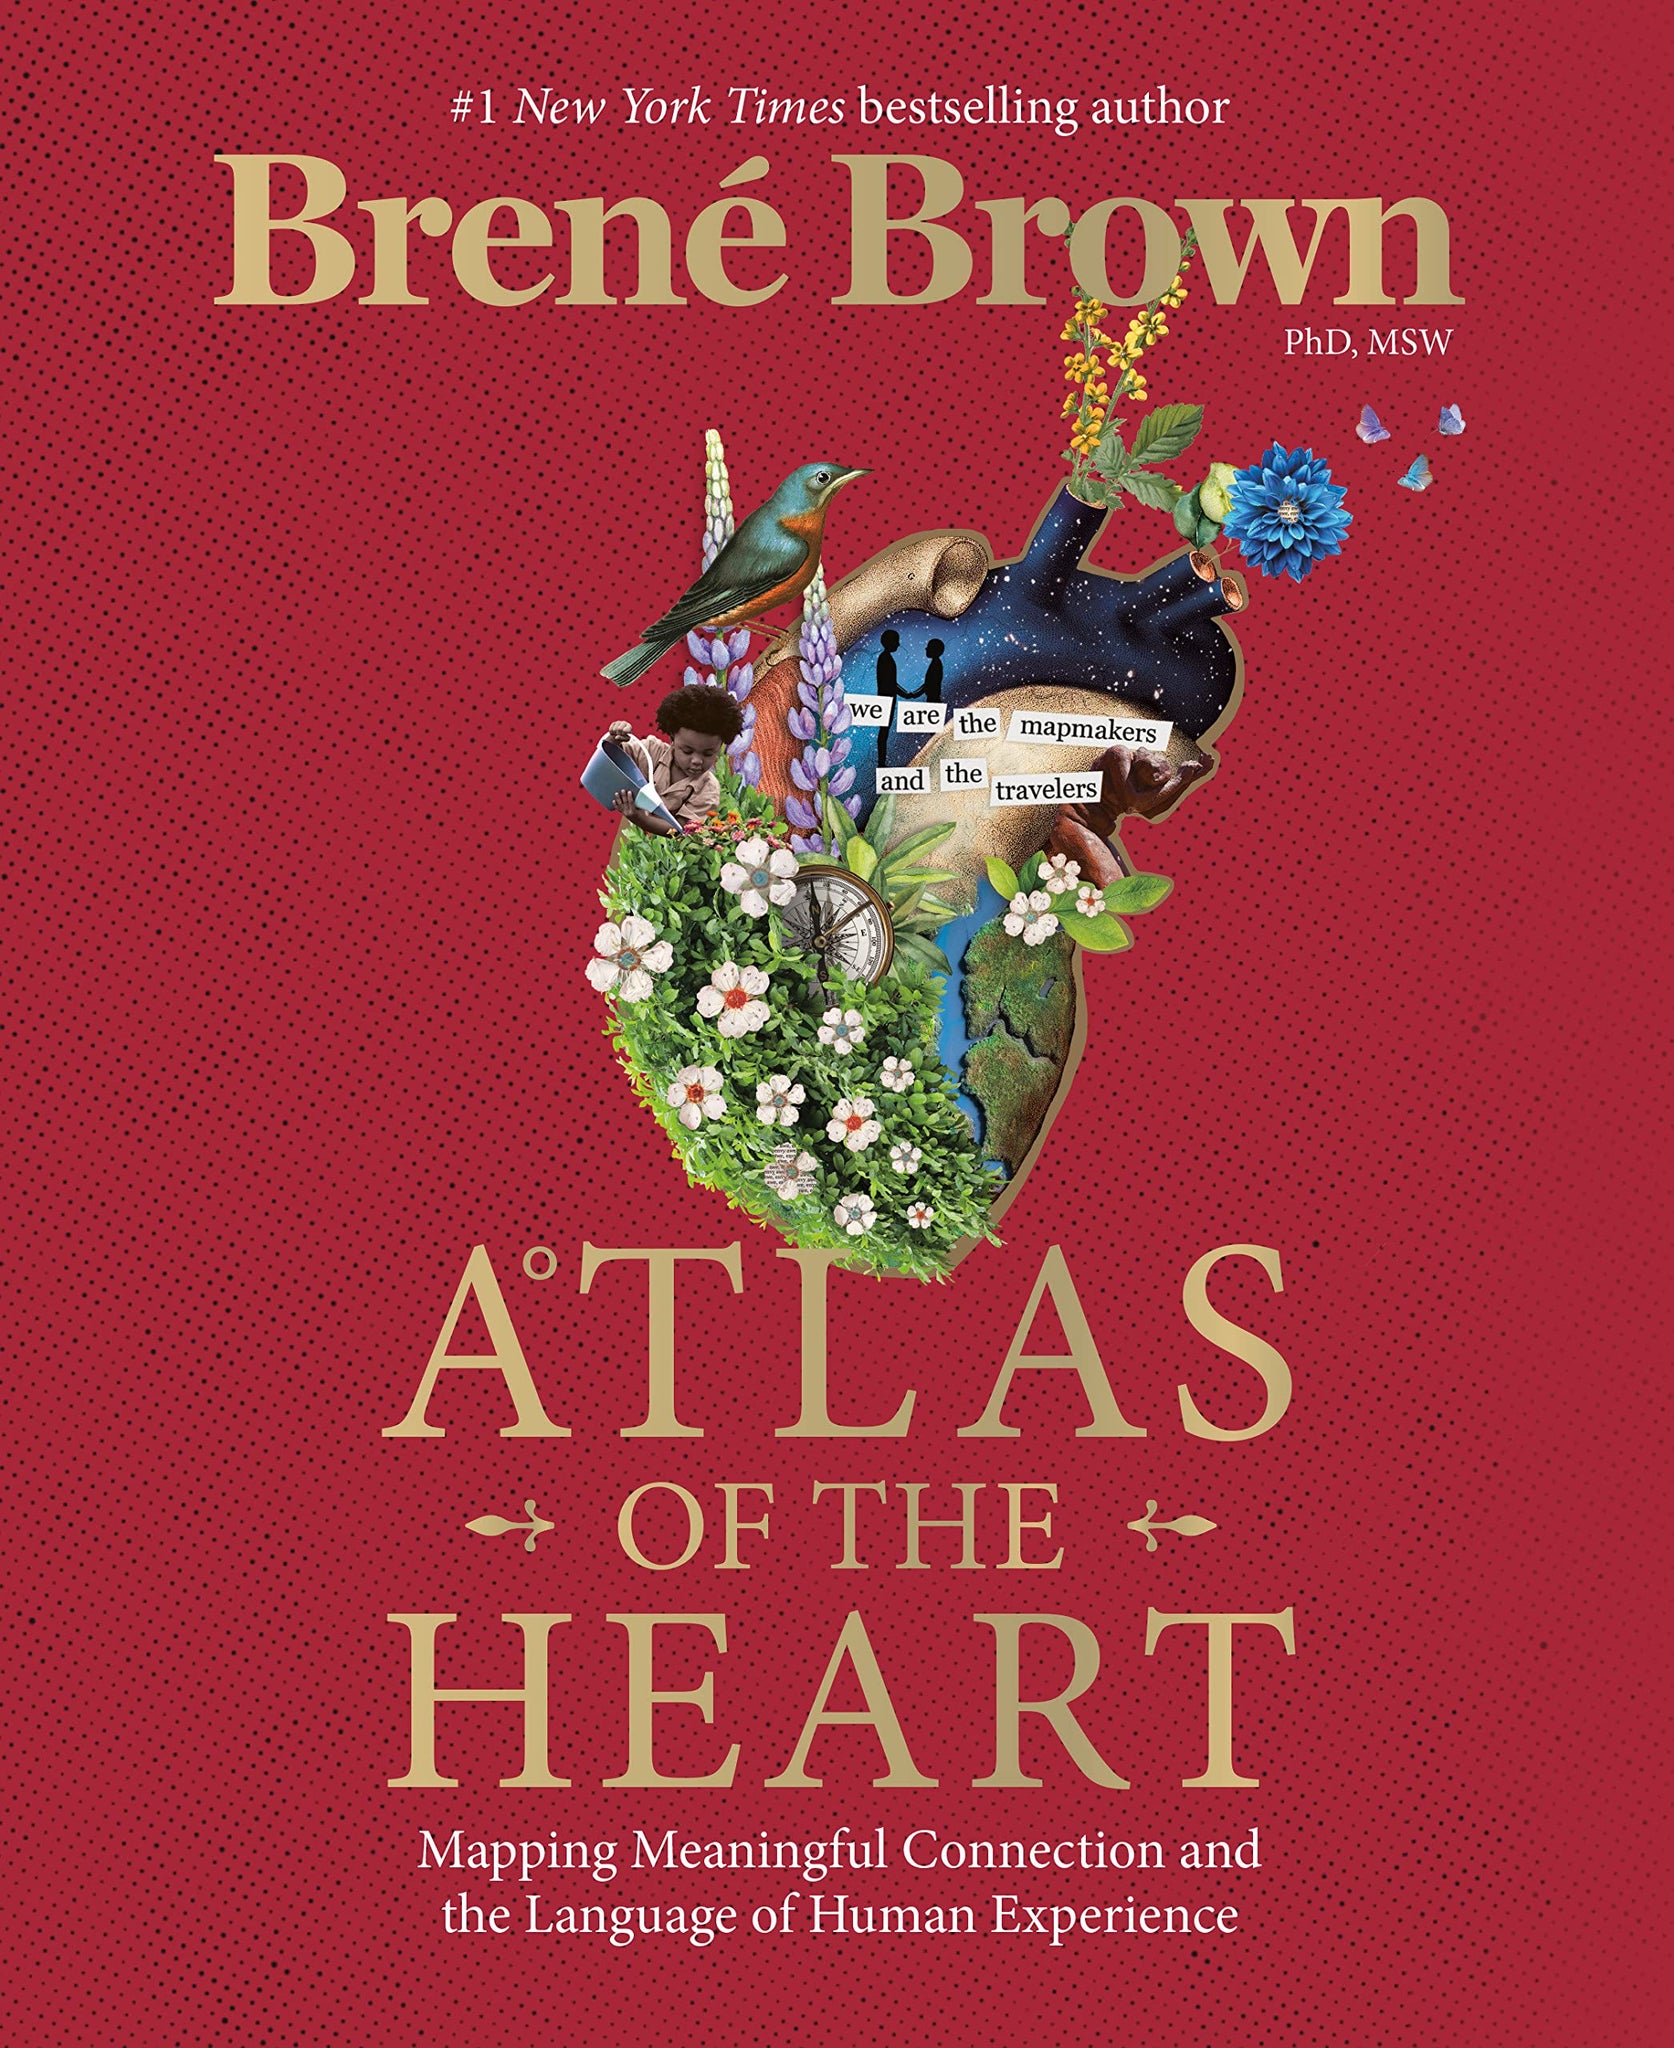 Atlas of the Heart by Brene Brown (Hardcover)